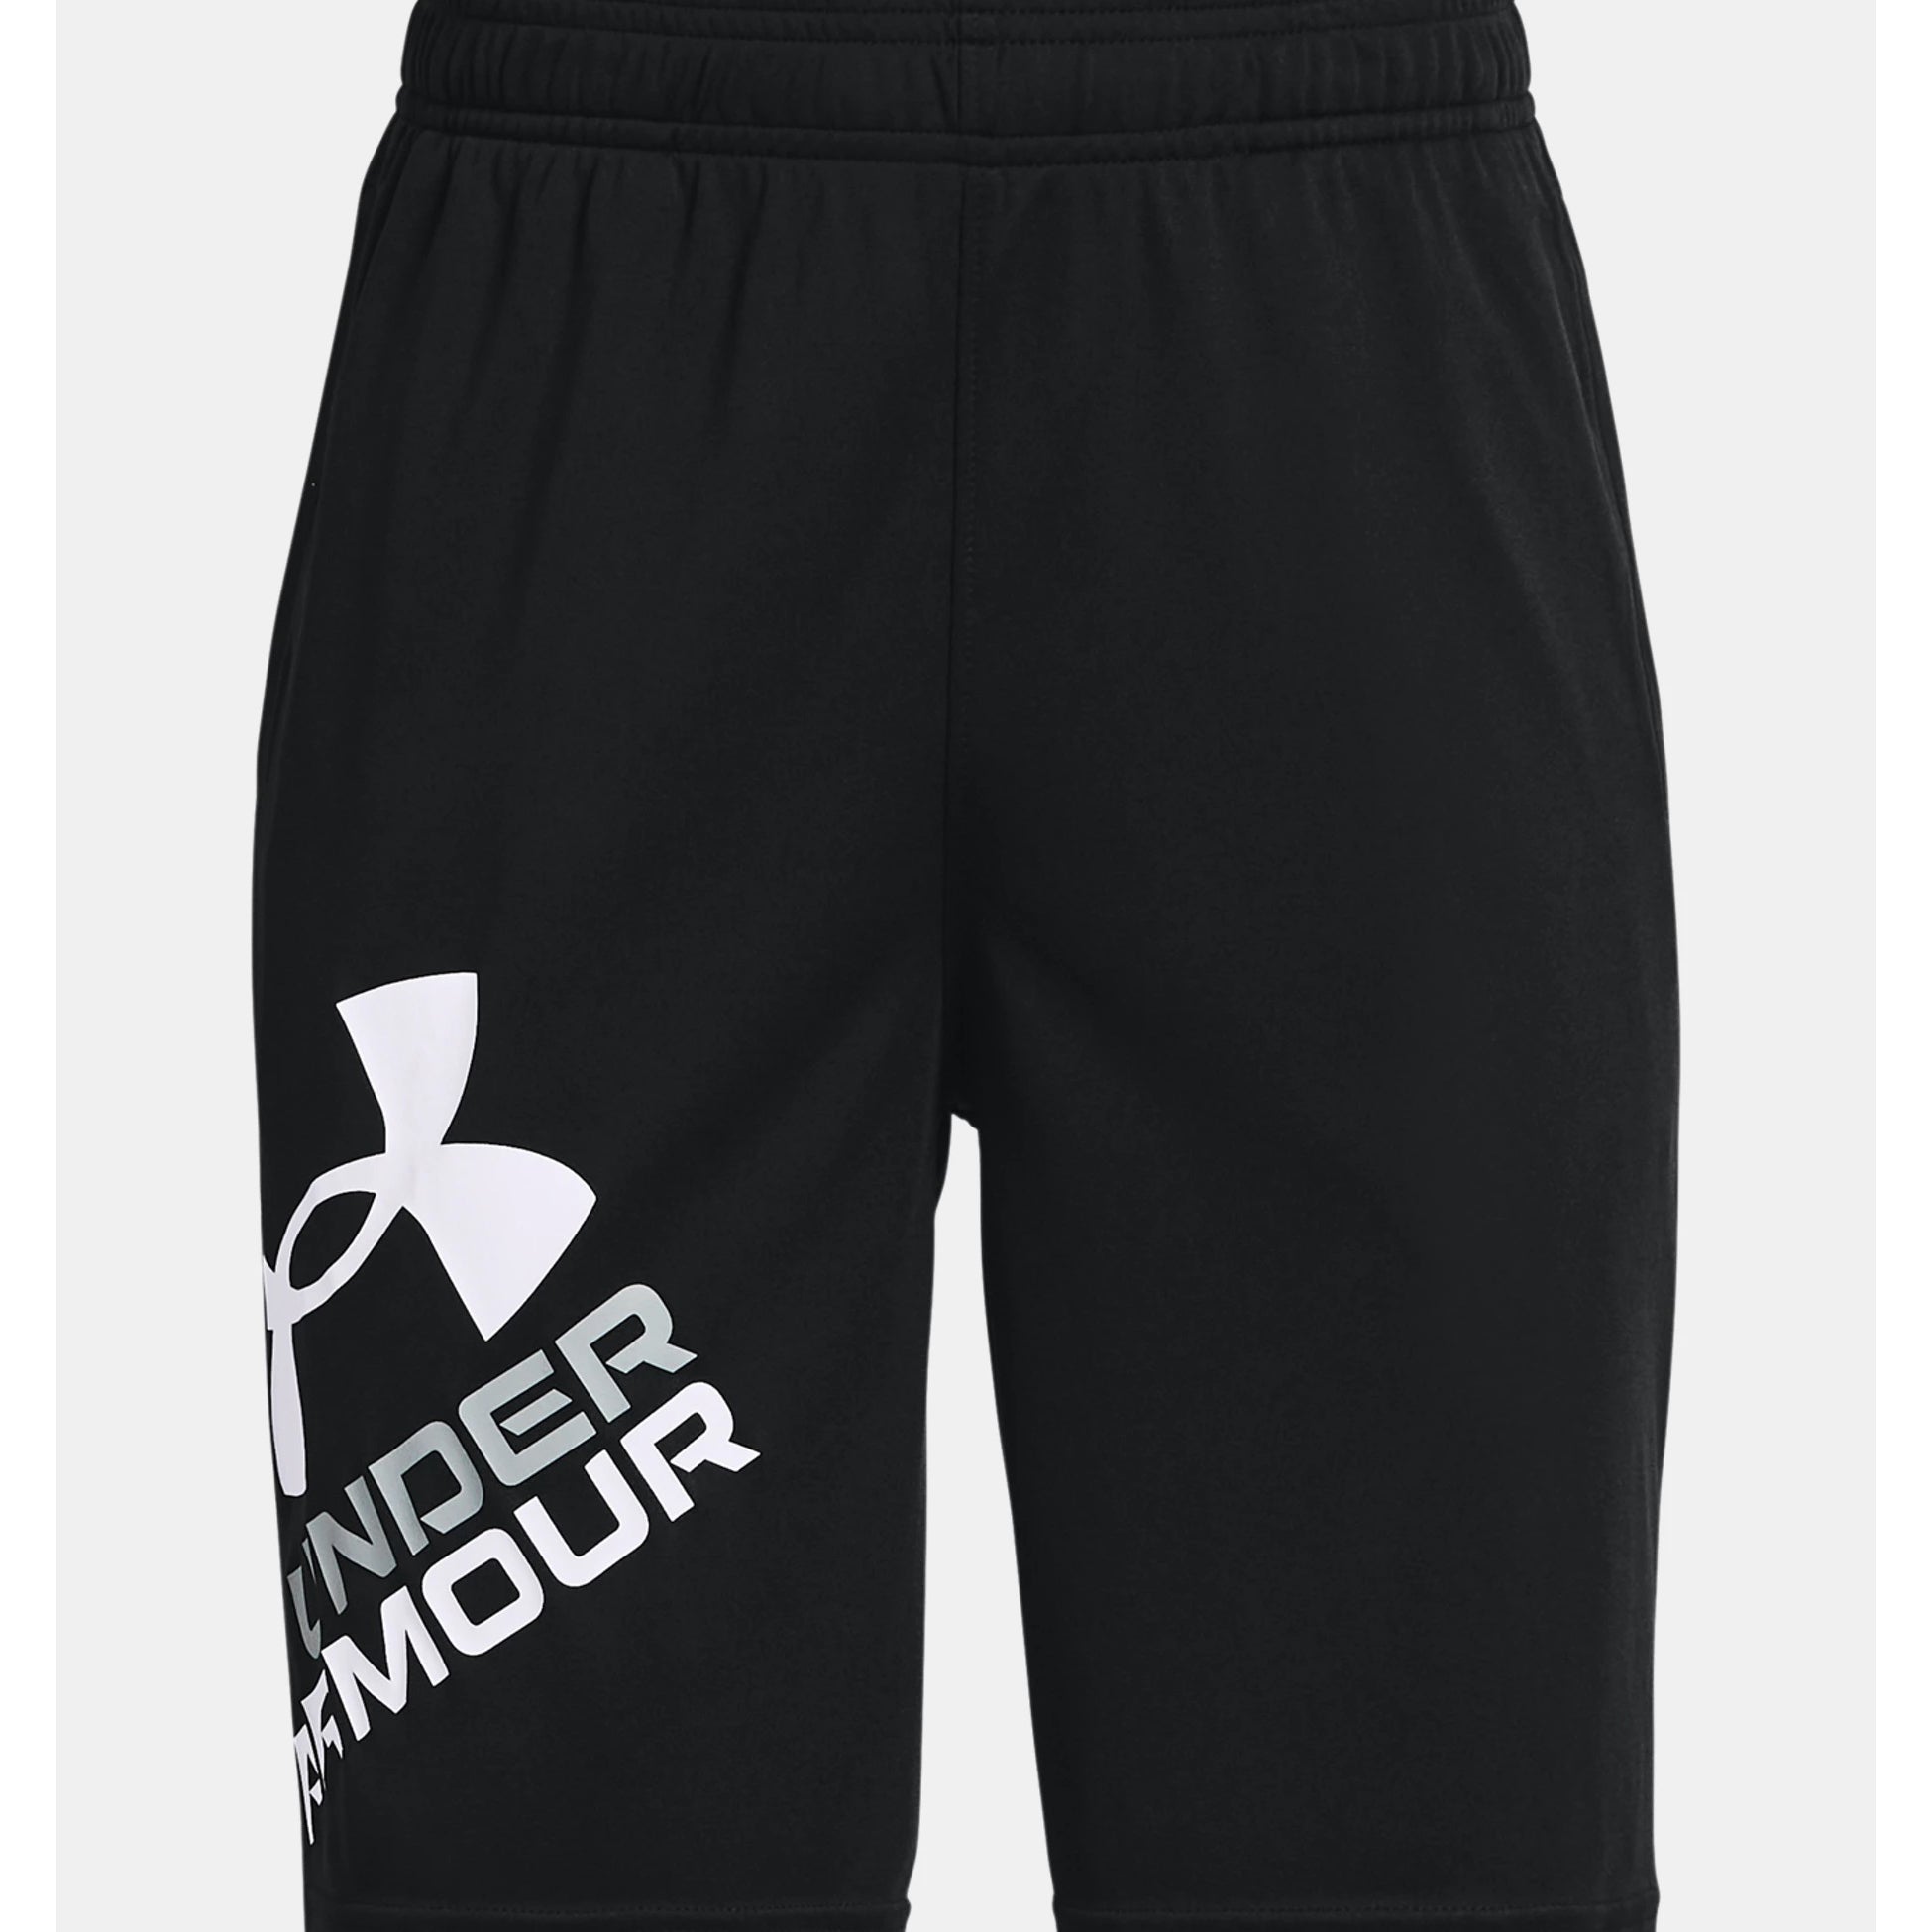 Under Armour Purple & Yellow Athletic Shorts – Sweet Pea & Teddy